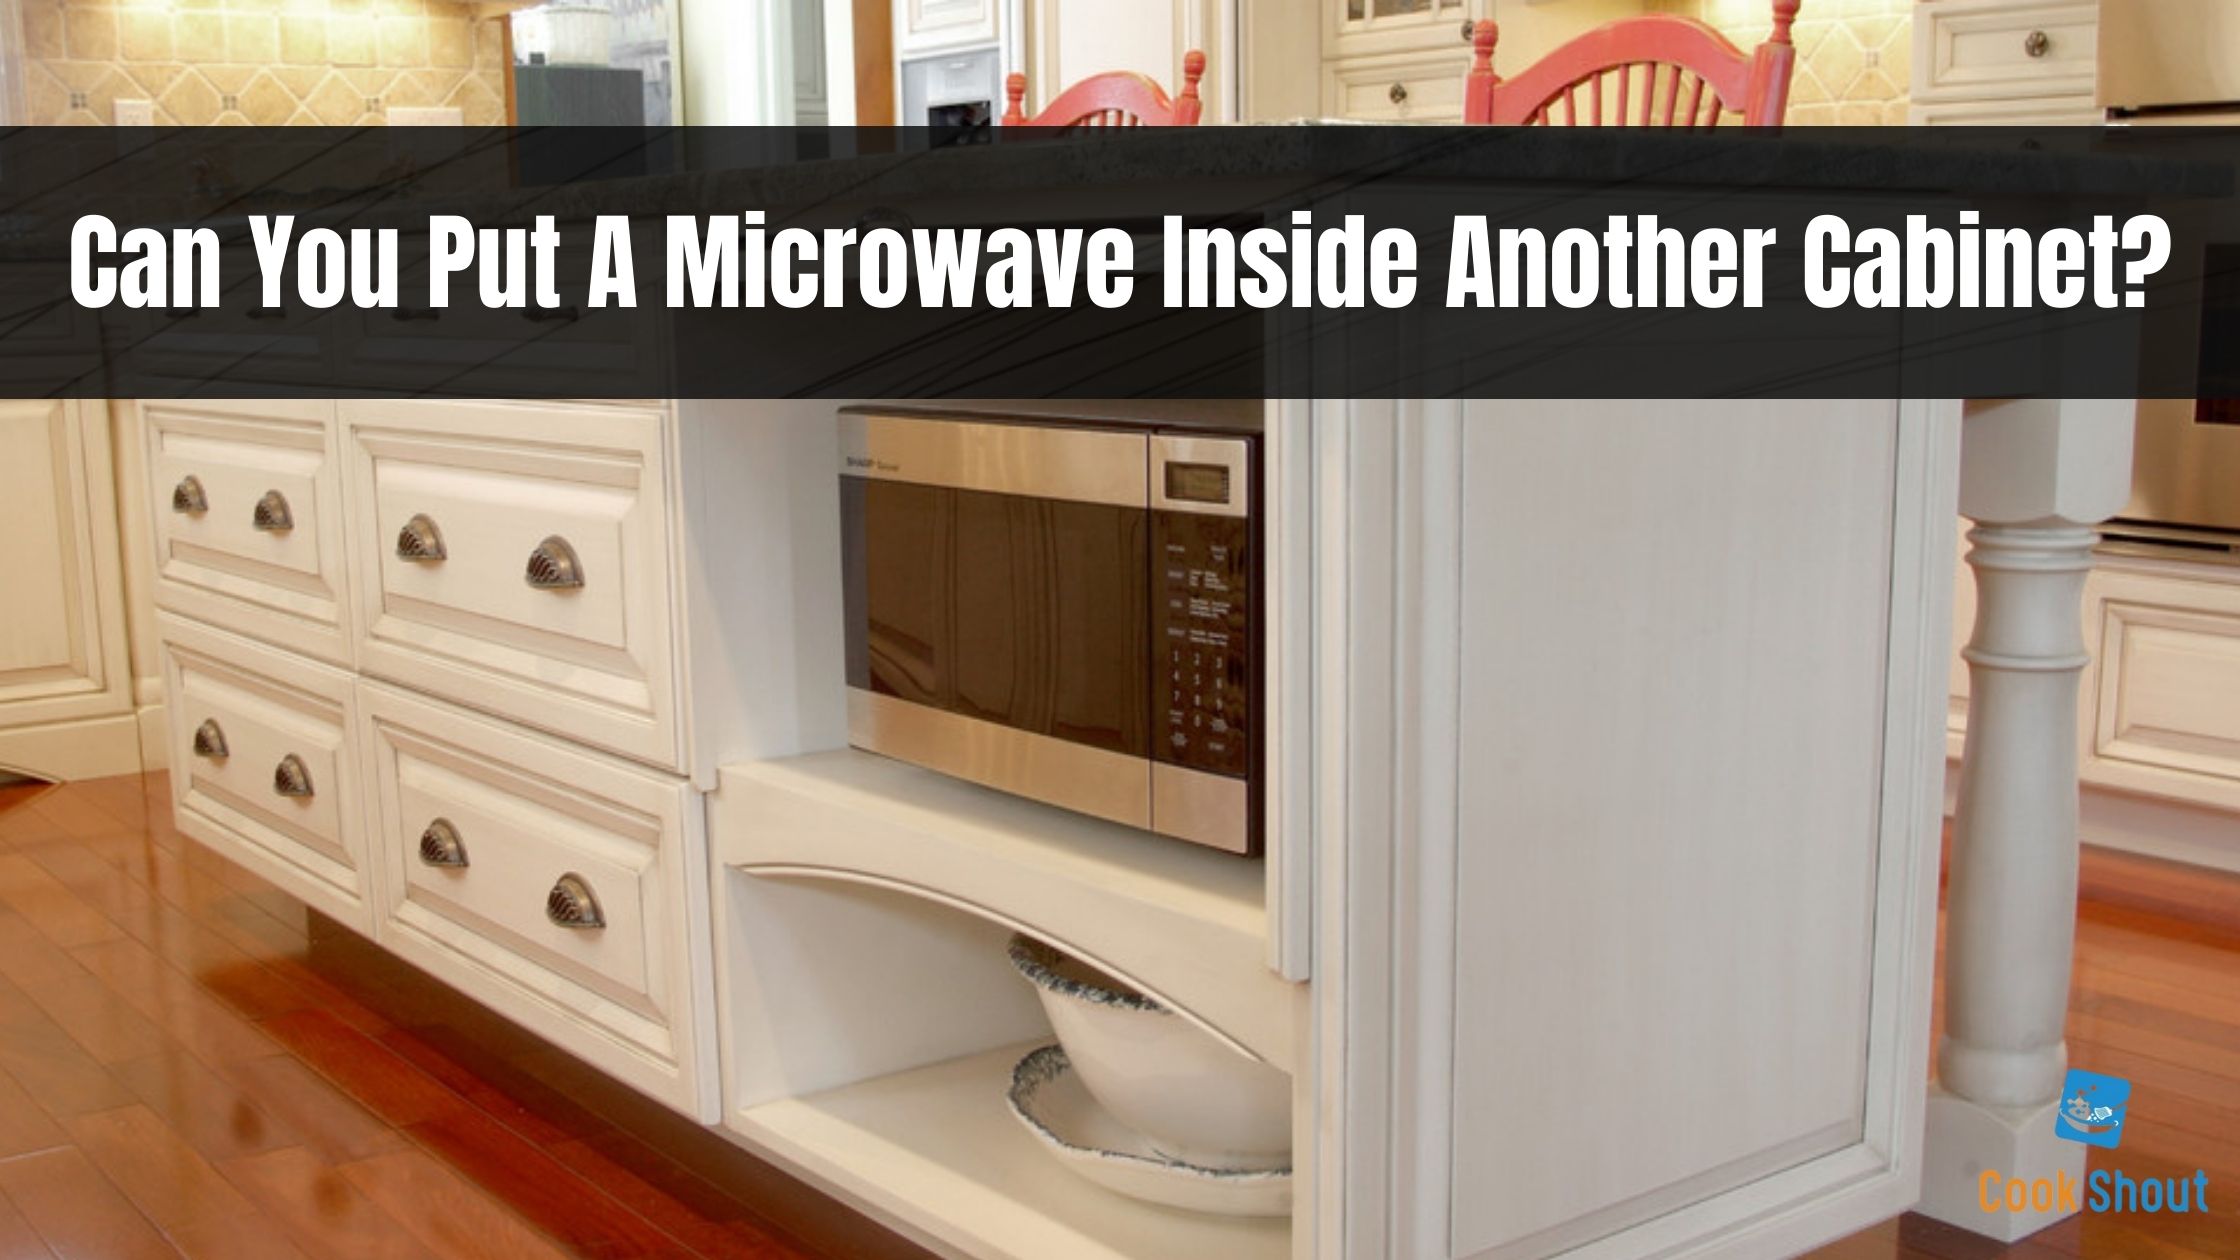 Can You Put A Microwave Inside Another Cabinet?